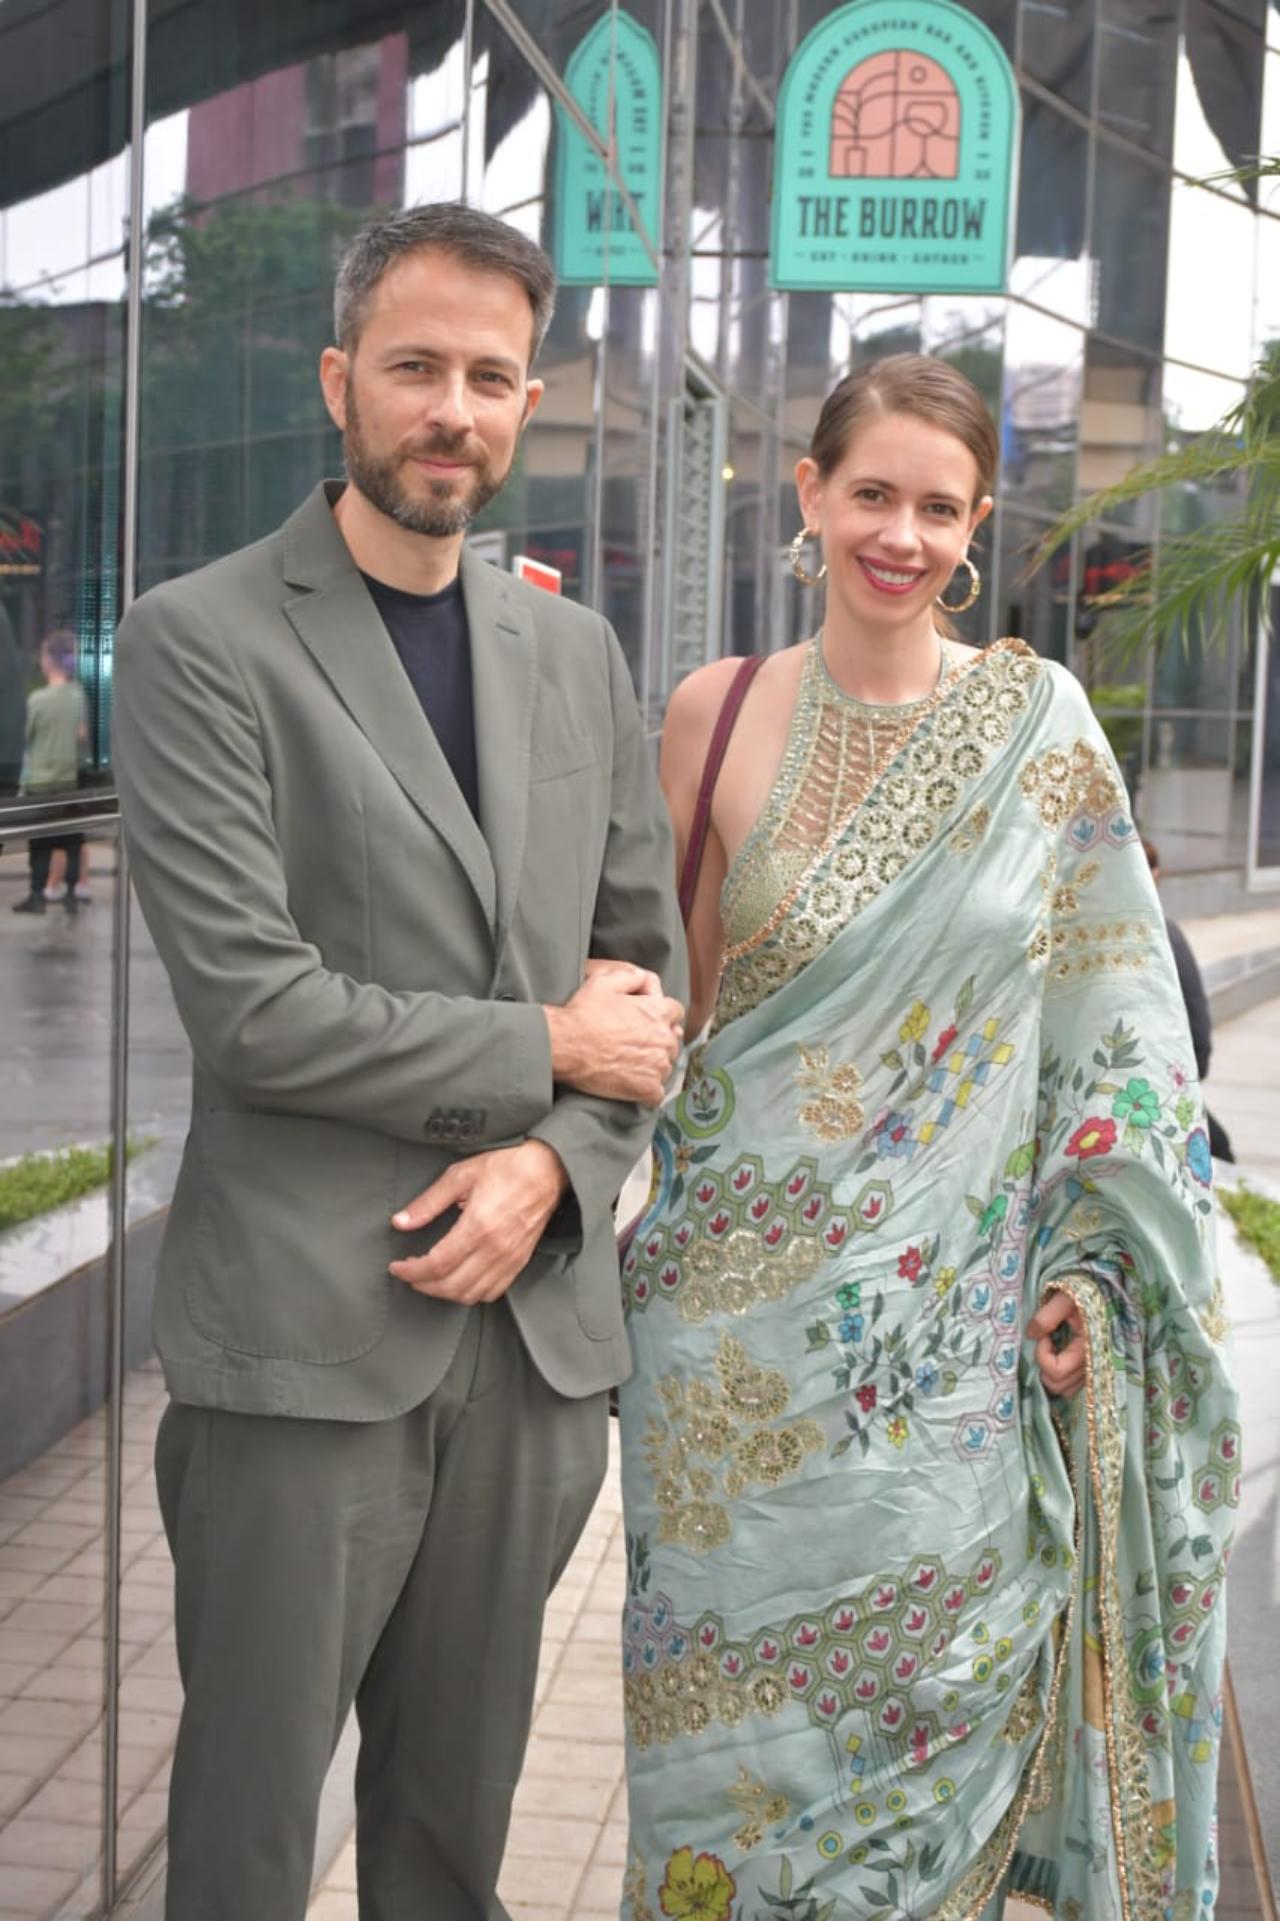 Anurag Kashyap's ex-wife and actress Kalki Koechlin also attended the celebration. The actress looked stunning in a printed green saree